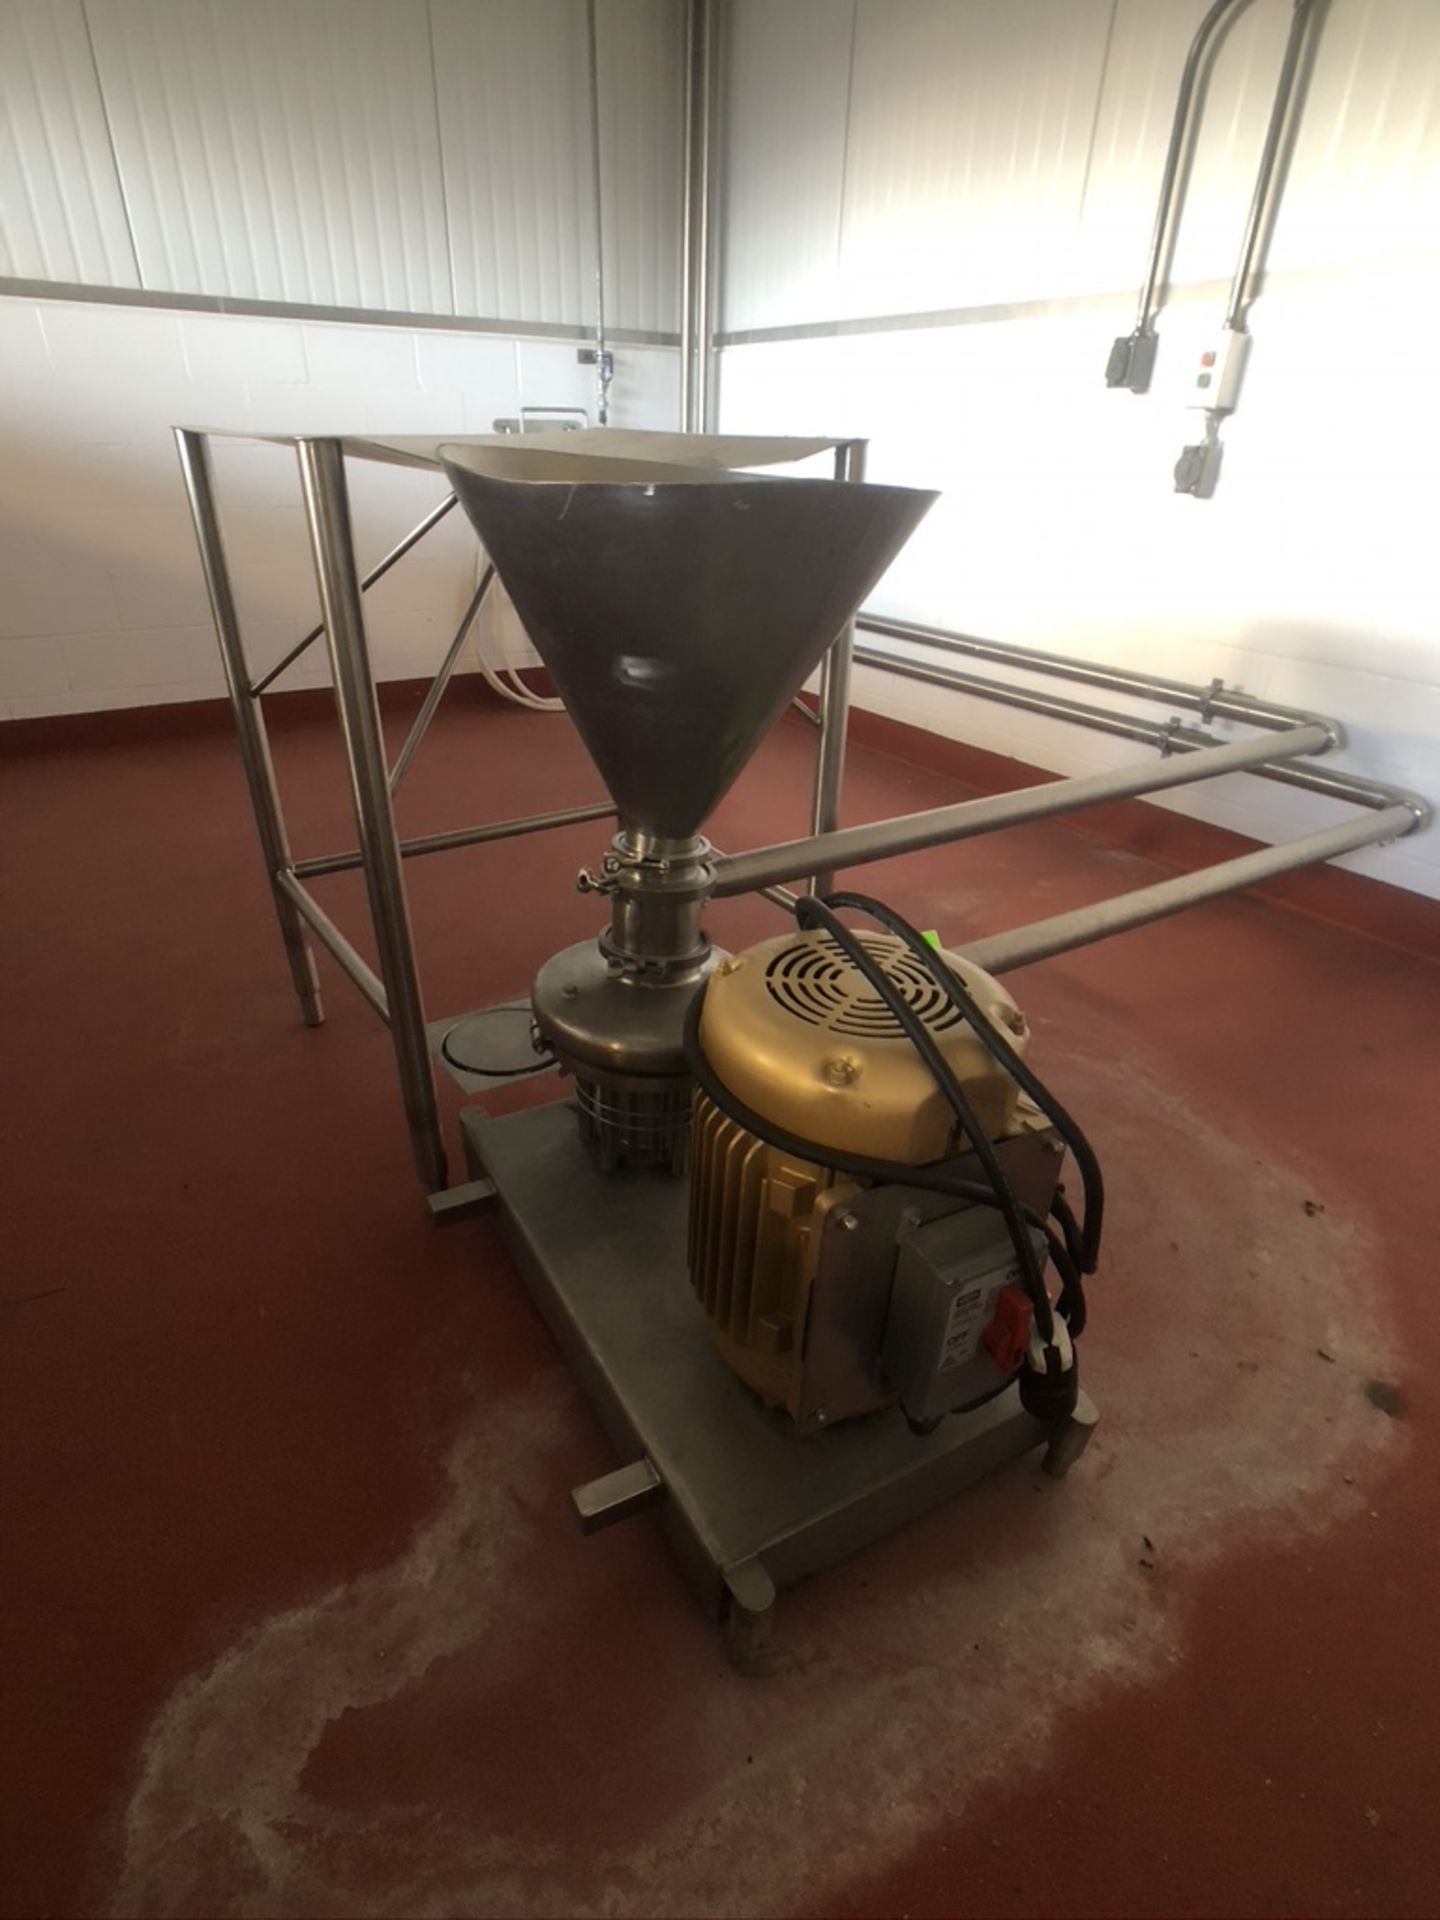 TRI-CLOVER / TRI-BLENDER, MODEL F4329MD-B40, S/N W2229, EQUIPPED WITH BALDOR MOTOR 20 HP 3520 RPM, - Image 5 of 13